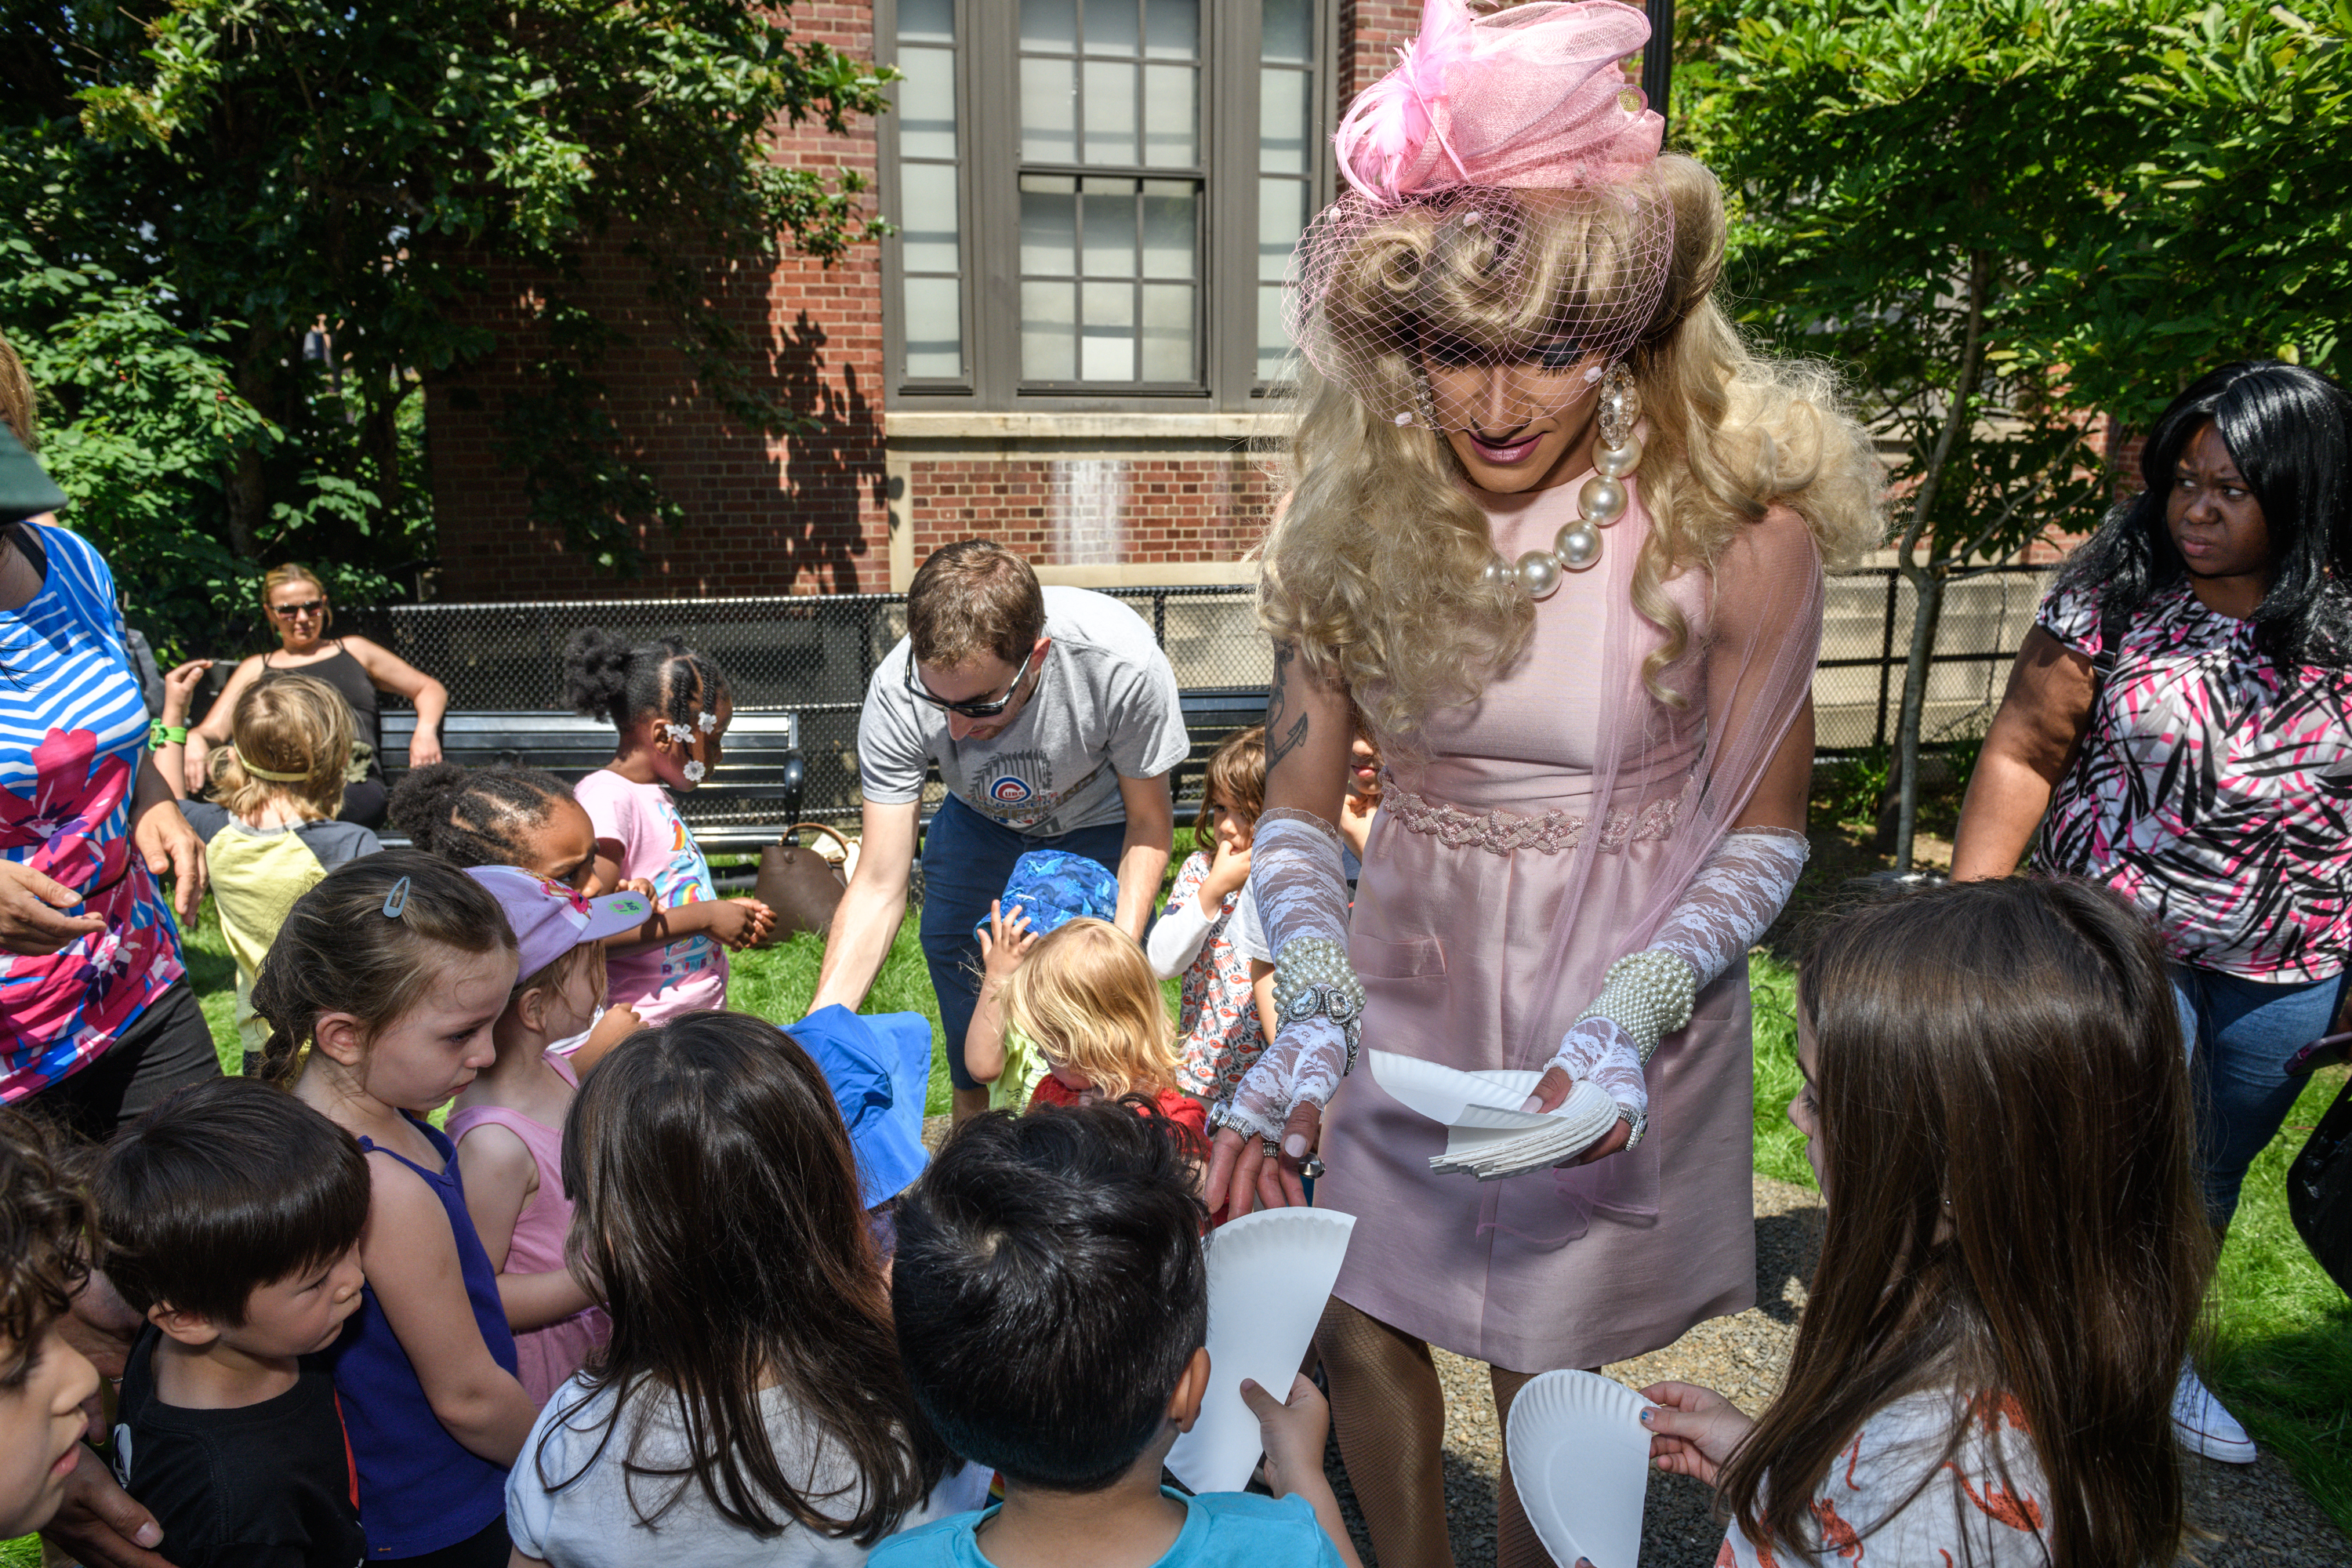 2018-New York-Drag Queen Story Hour-Witti Repartee and Lola Lemon at Park Slope Public Library